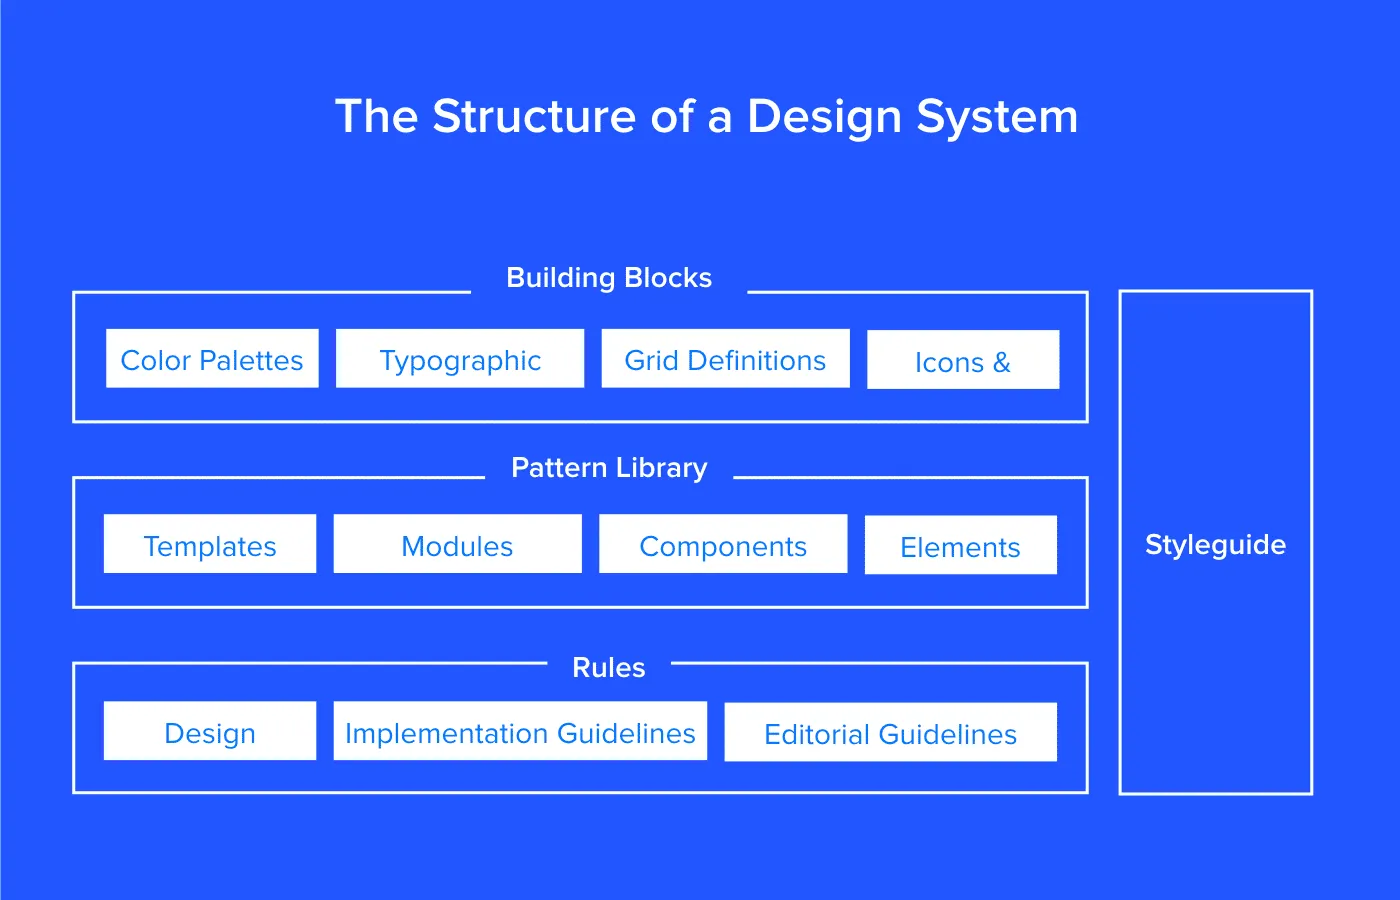 Design system as a product